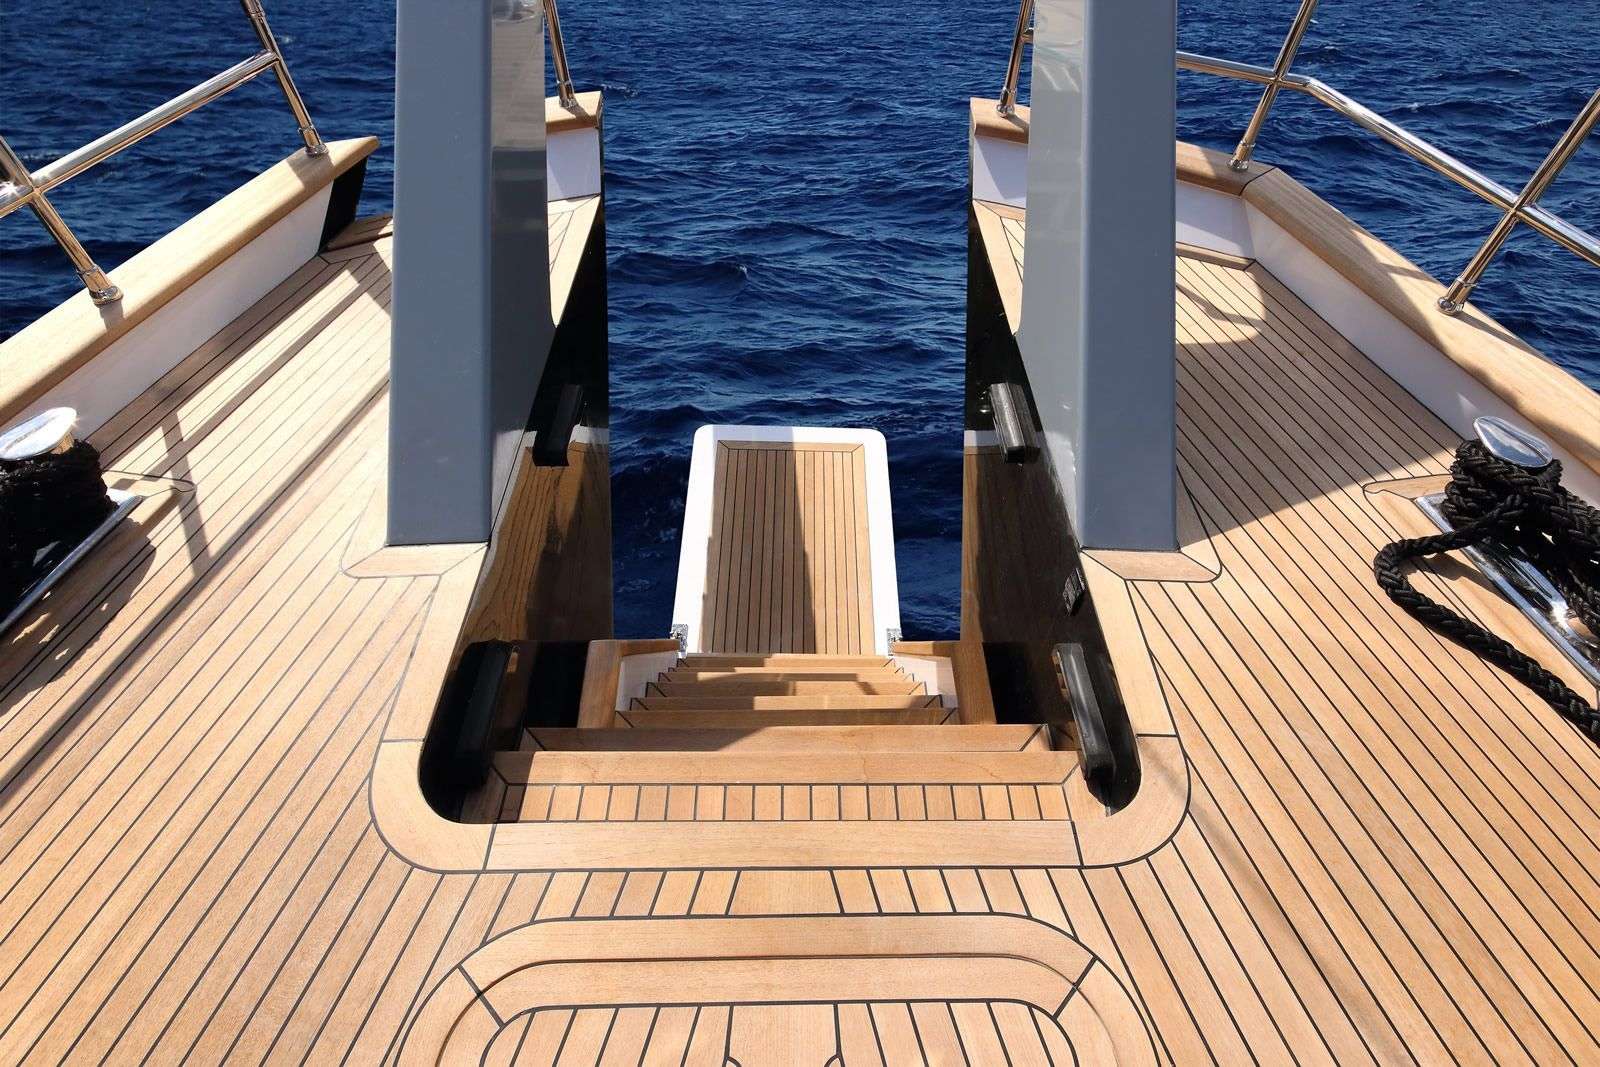 moss - Yacht Charter Cyprus & Boat hire in East Mediterranean 5